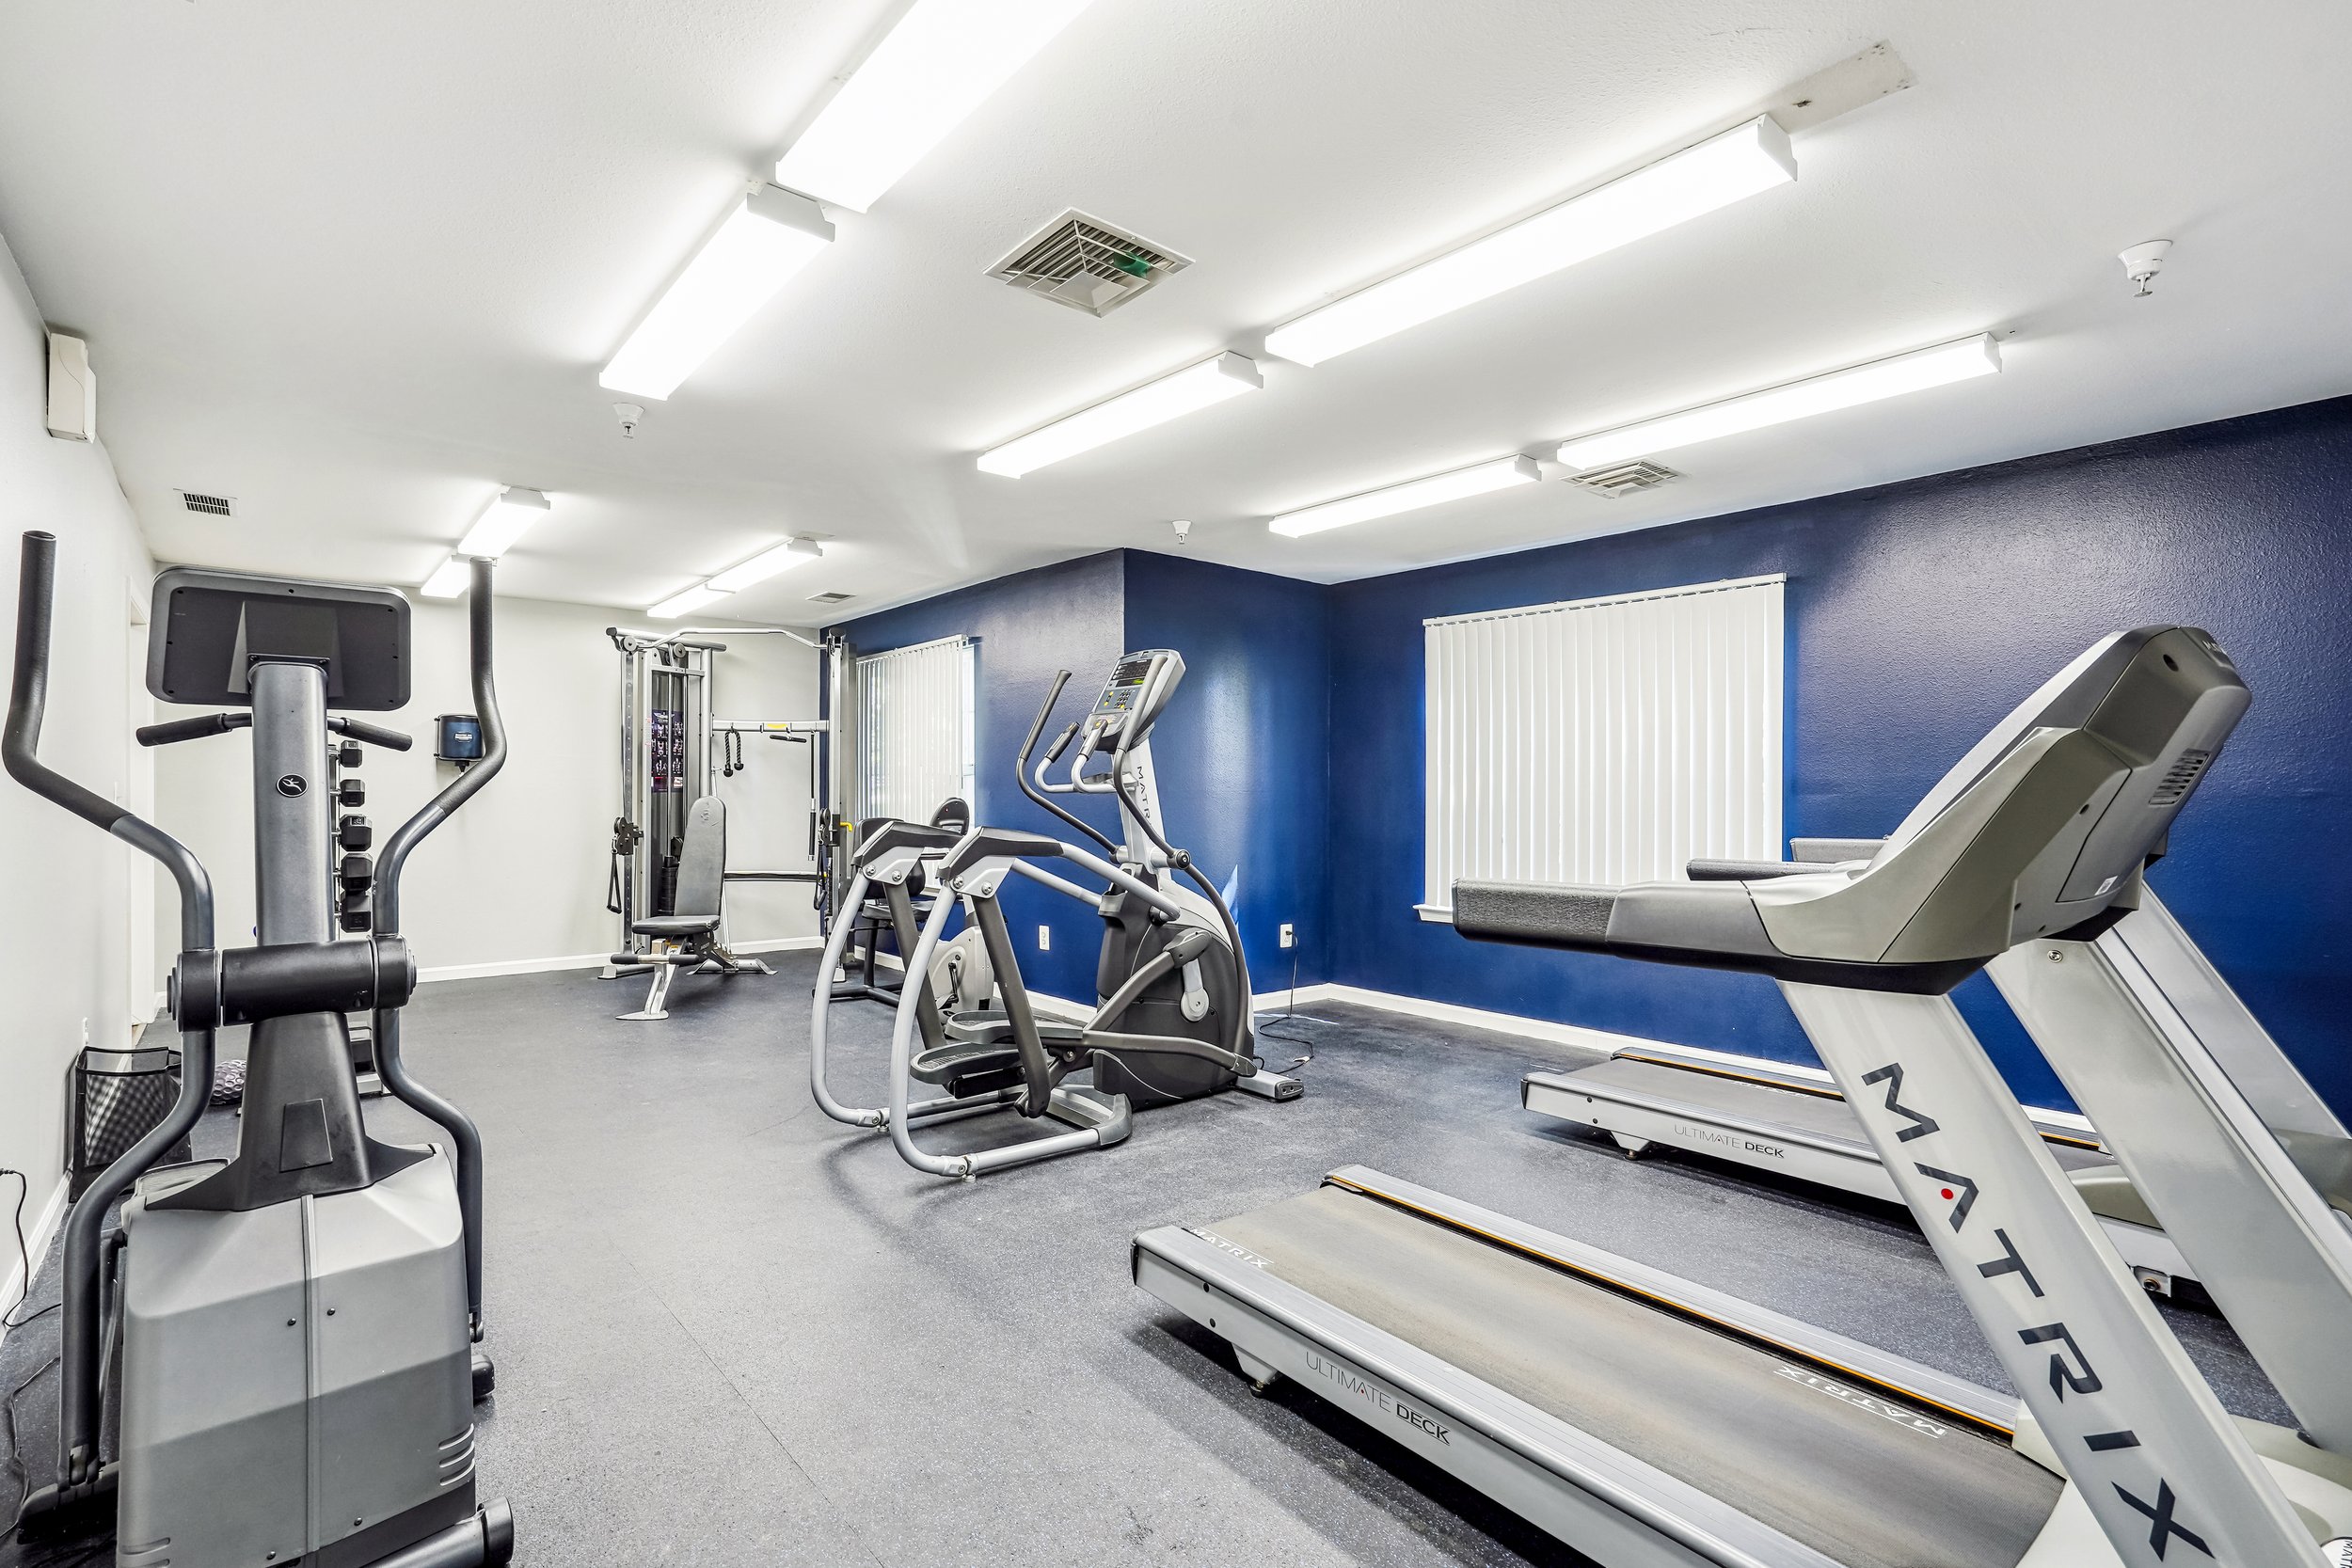  The community fitness center at Potomac Station Apartments is fully equipped. 